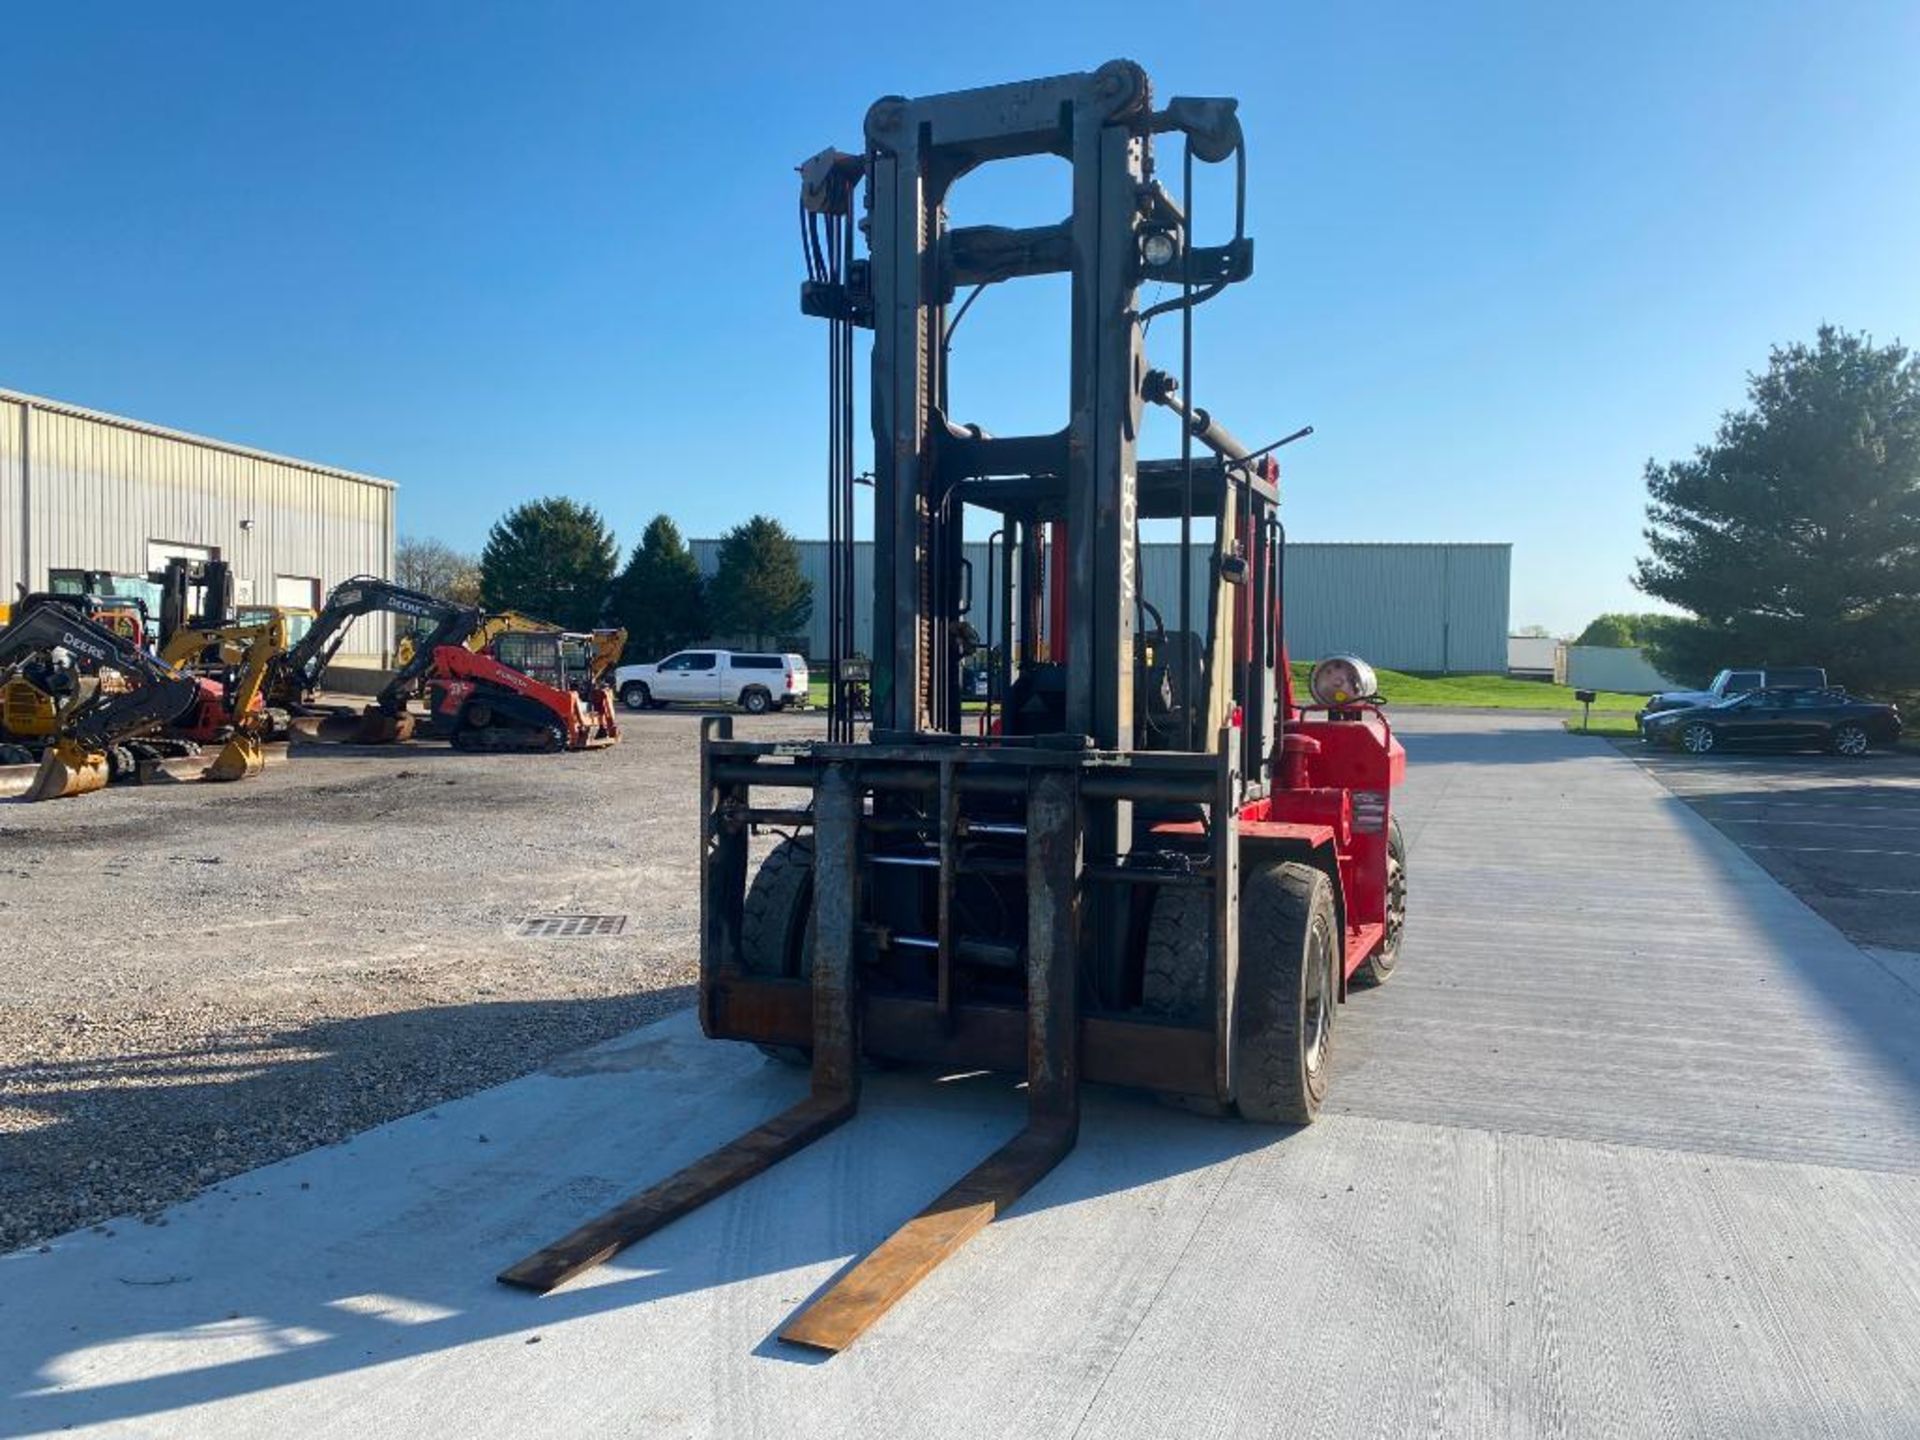 Taylor 25,000-LB. Capacity Forklift, Model THD-250S, S/N S-T1-29286, LPG, Dual Drive Pneumatic Tires - Image 2 of 5